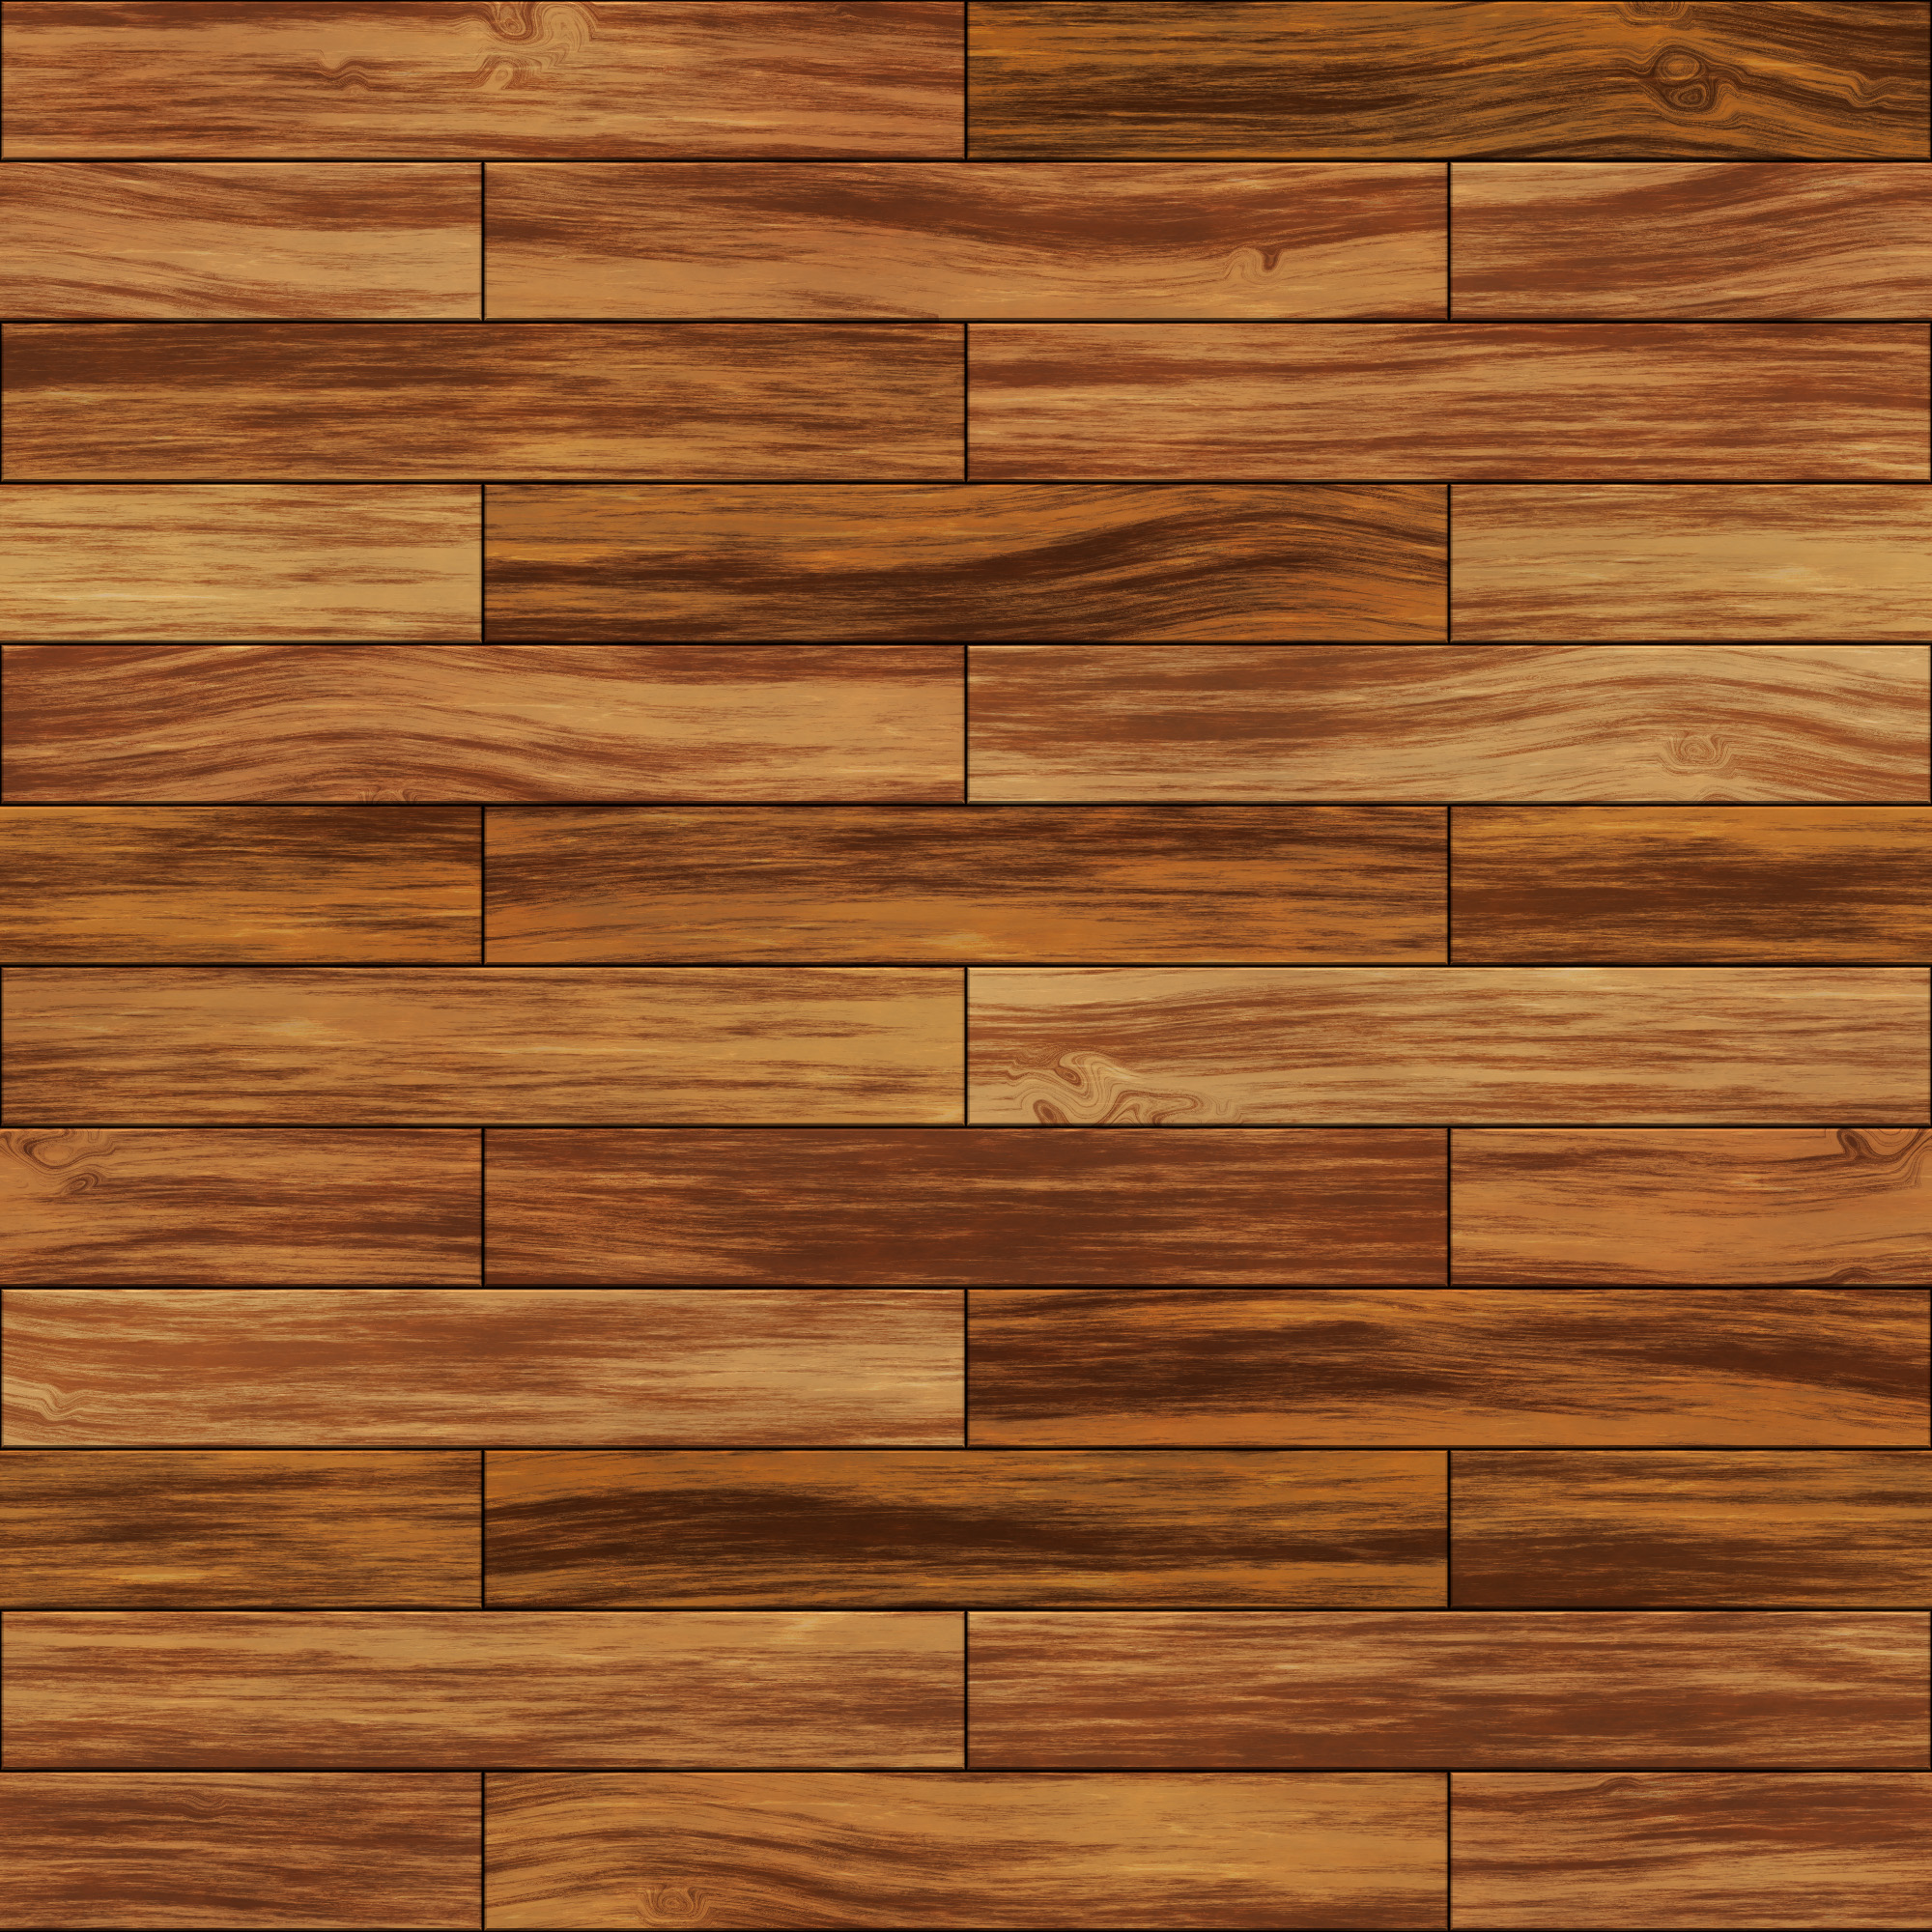 wood flooring texture seamless background wood planks 1 MGLOXGT